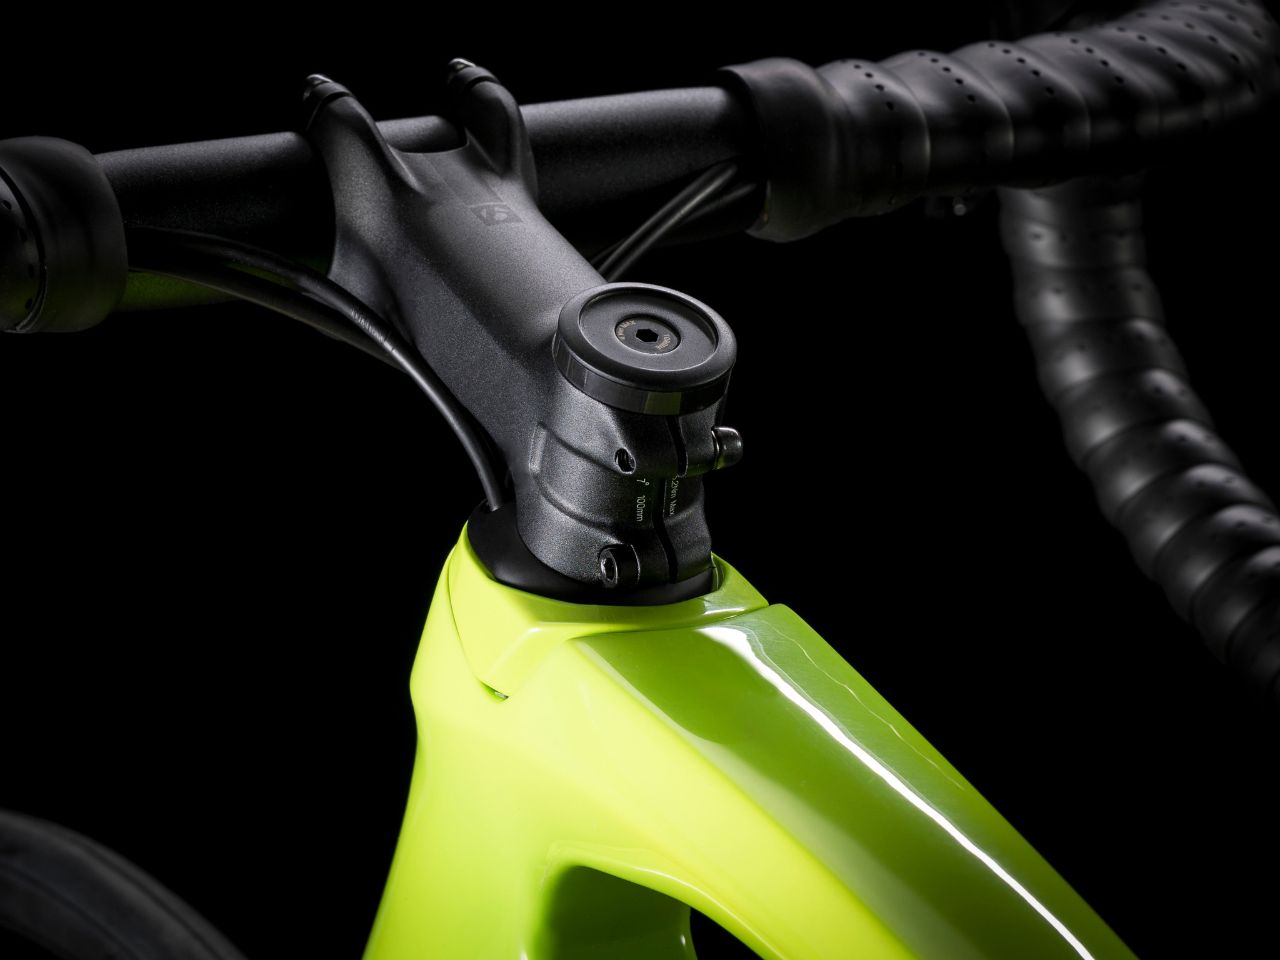 Trek lays up OCLV 500 carbon fiber to lower the entry point on new Madone SL 